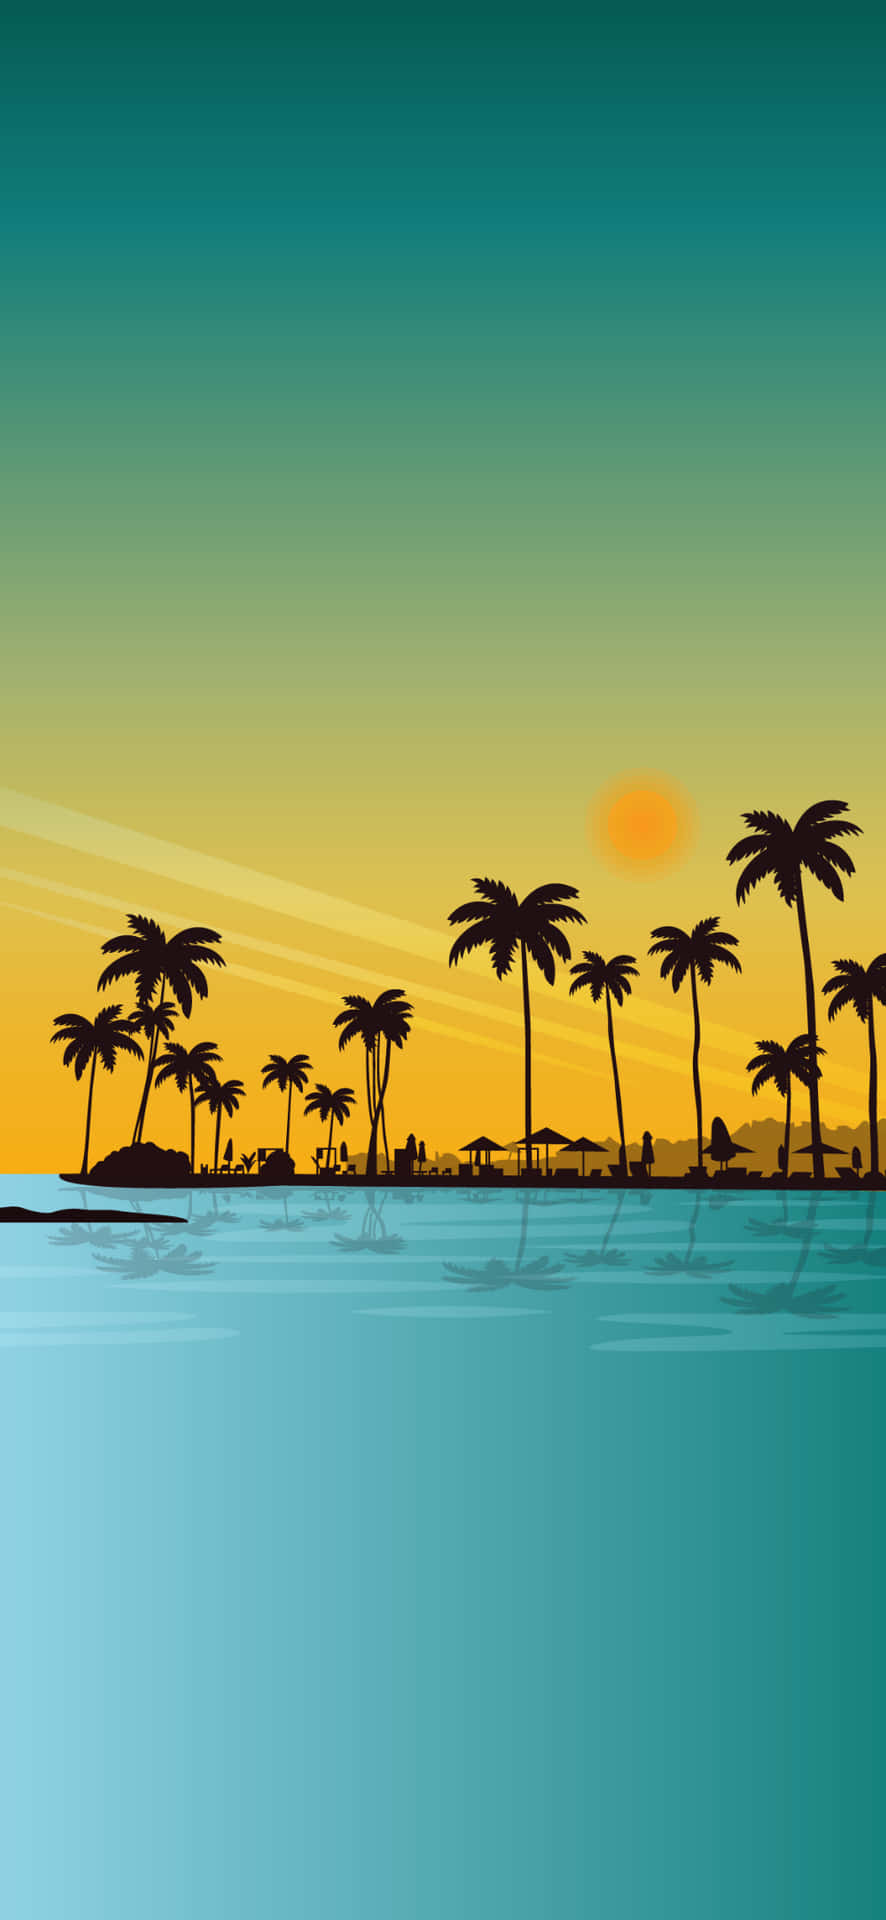 Tropical Themed Background Image Picture